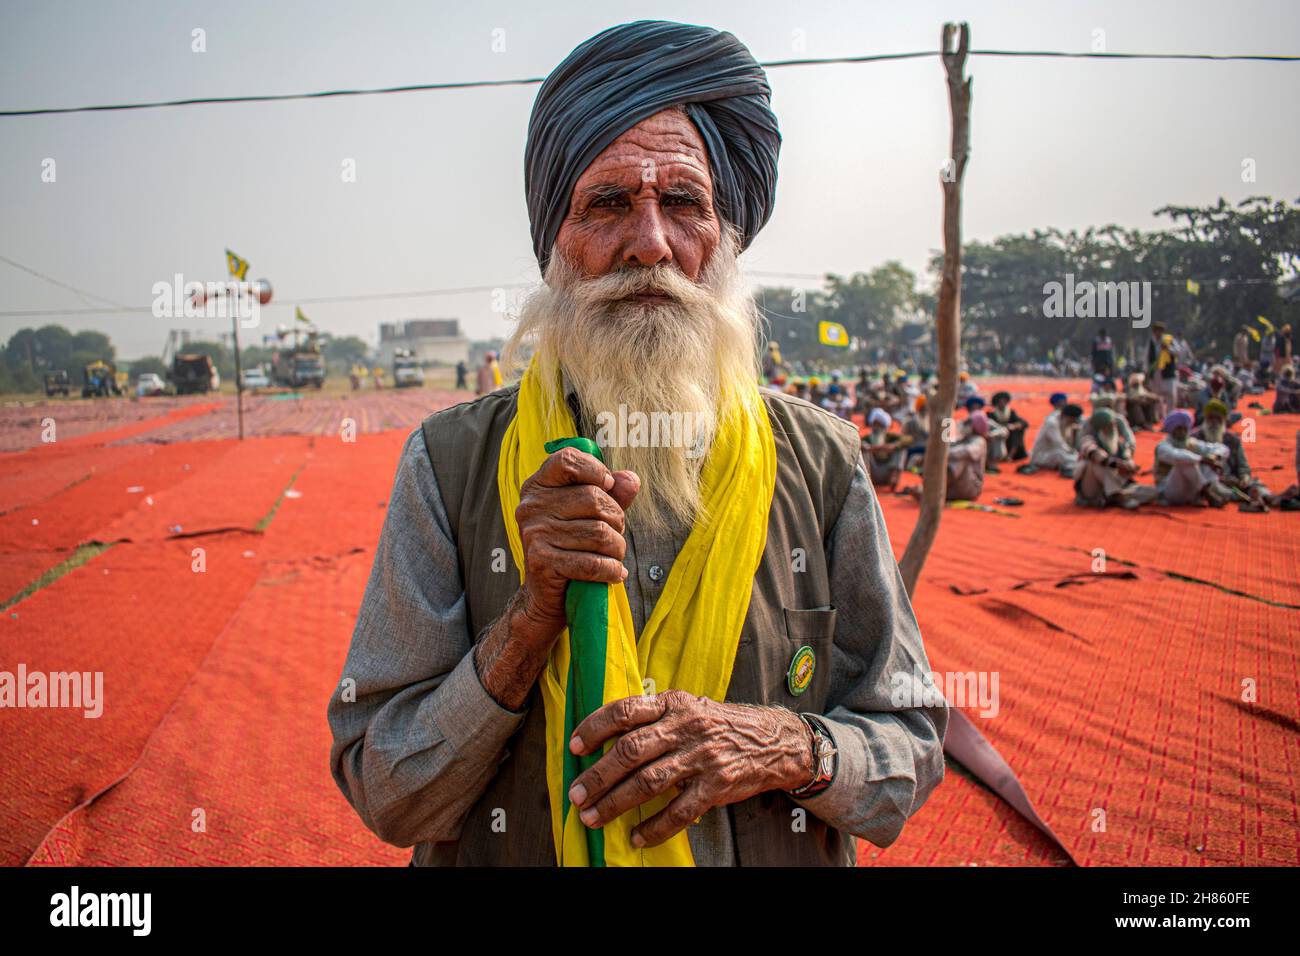 New Delhi, India. 27th Nov, 2021. Farmers gather to mark the first anniversary of their protest against the controversial farm laws on the outskirts of the capital city Delhi at Pakora Chowk near Tikri Border. (Photo by Mohsin Javed/Pacific Press) Credit: Pacific Press Media Production Corp./Alamy Live News Stock Photo